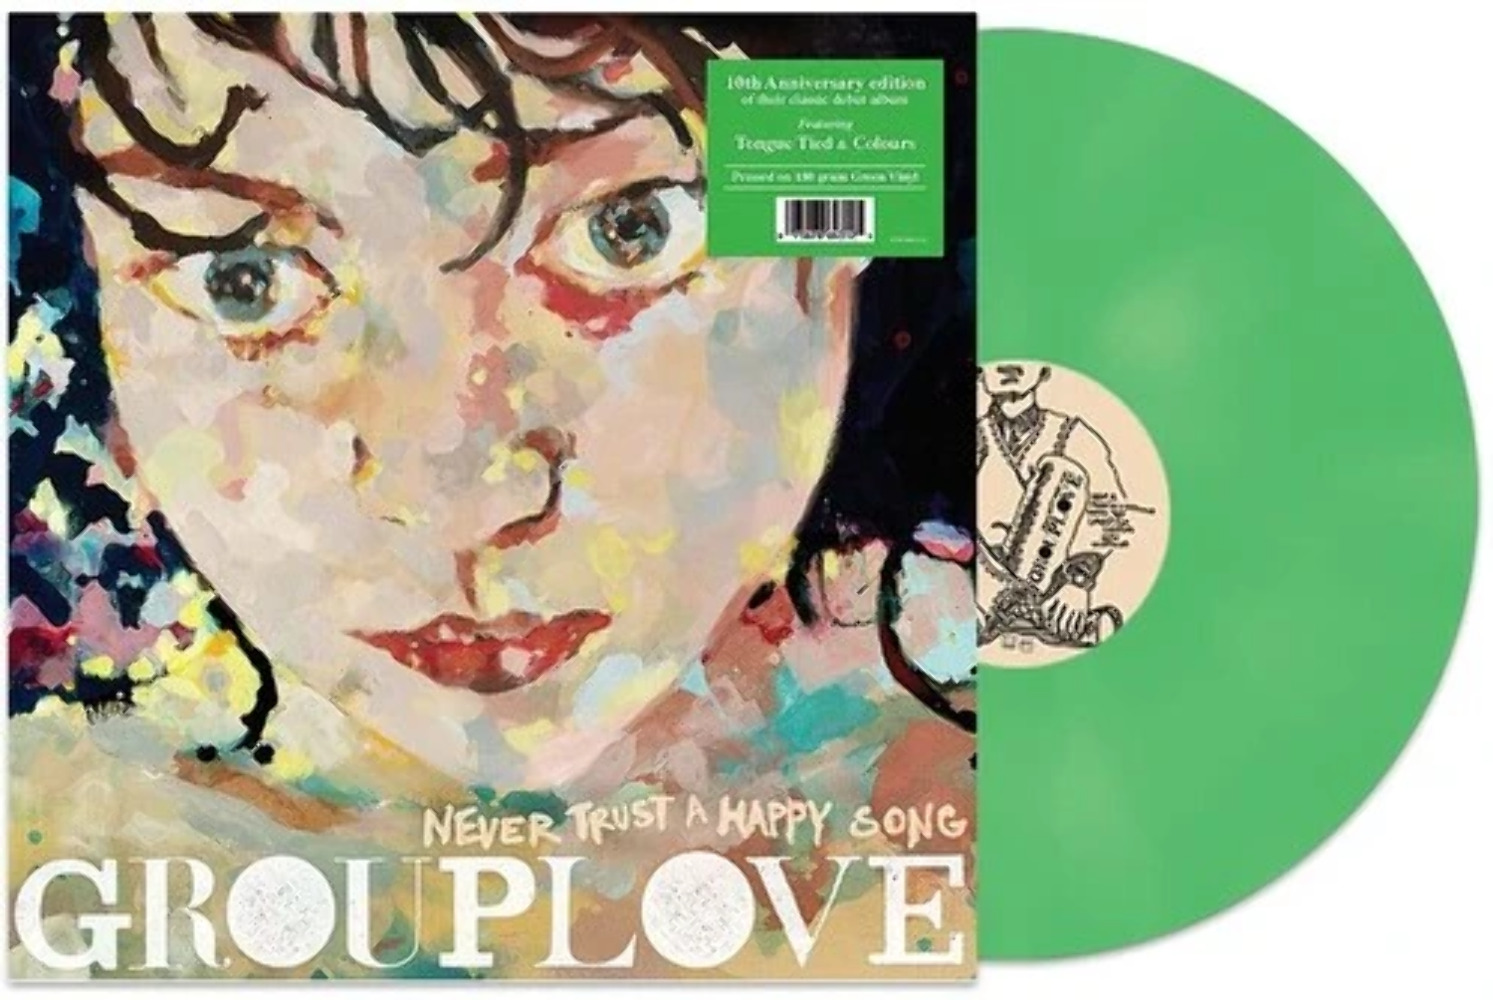 Grouplove - Never Trust A Happy Song [Limited Edition Green Vinyl] NEW Sealed